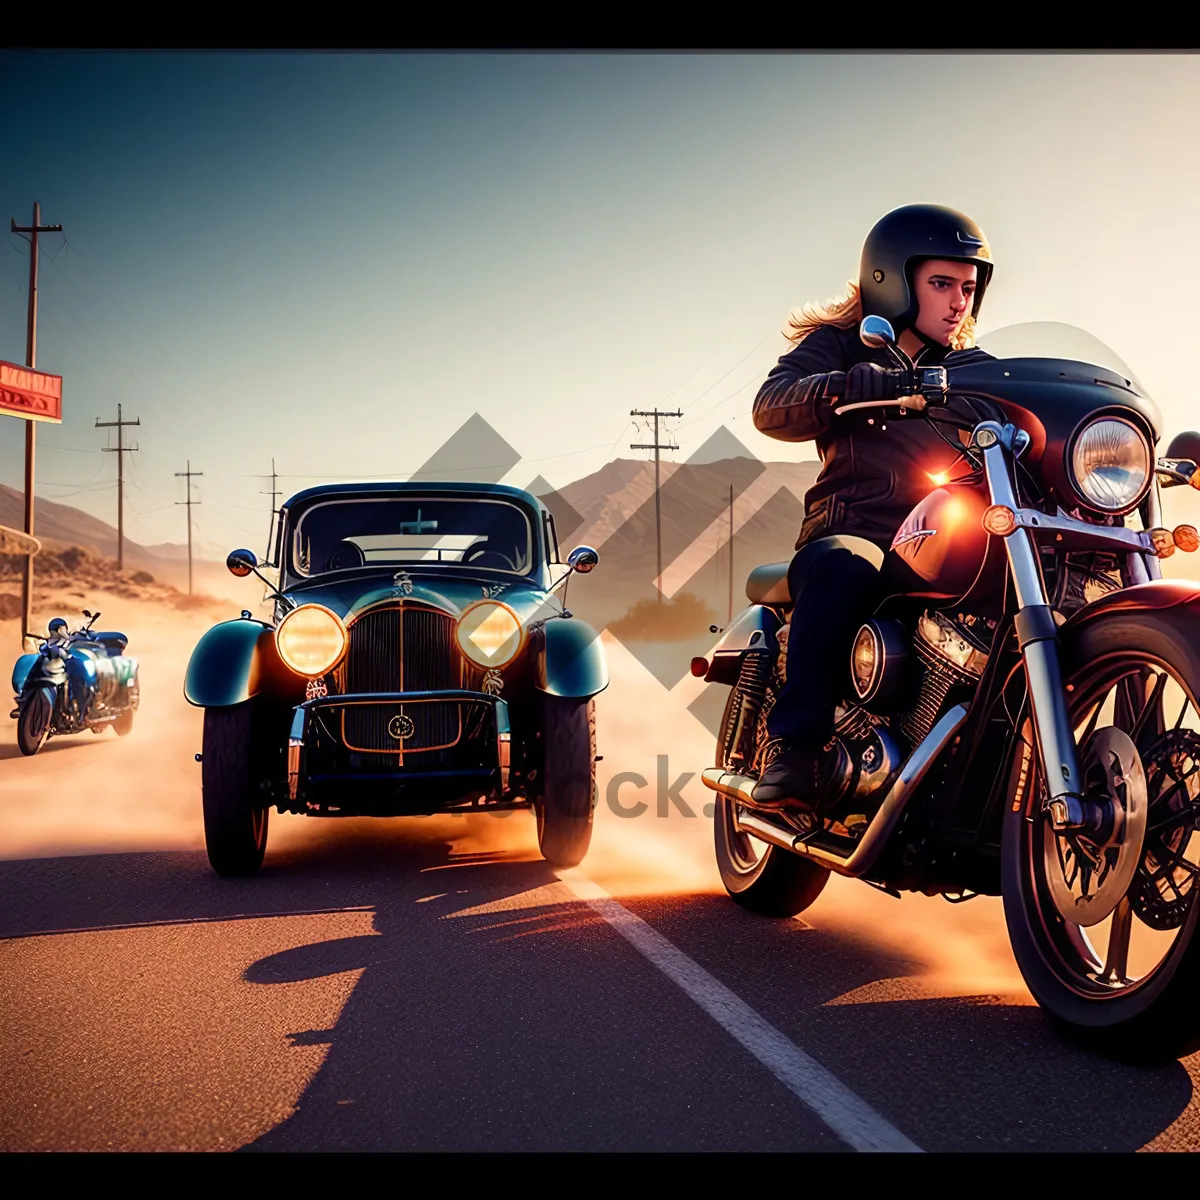 Picture of Speed Thrills: Motorcycle Helmet and Sports Gear